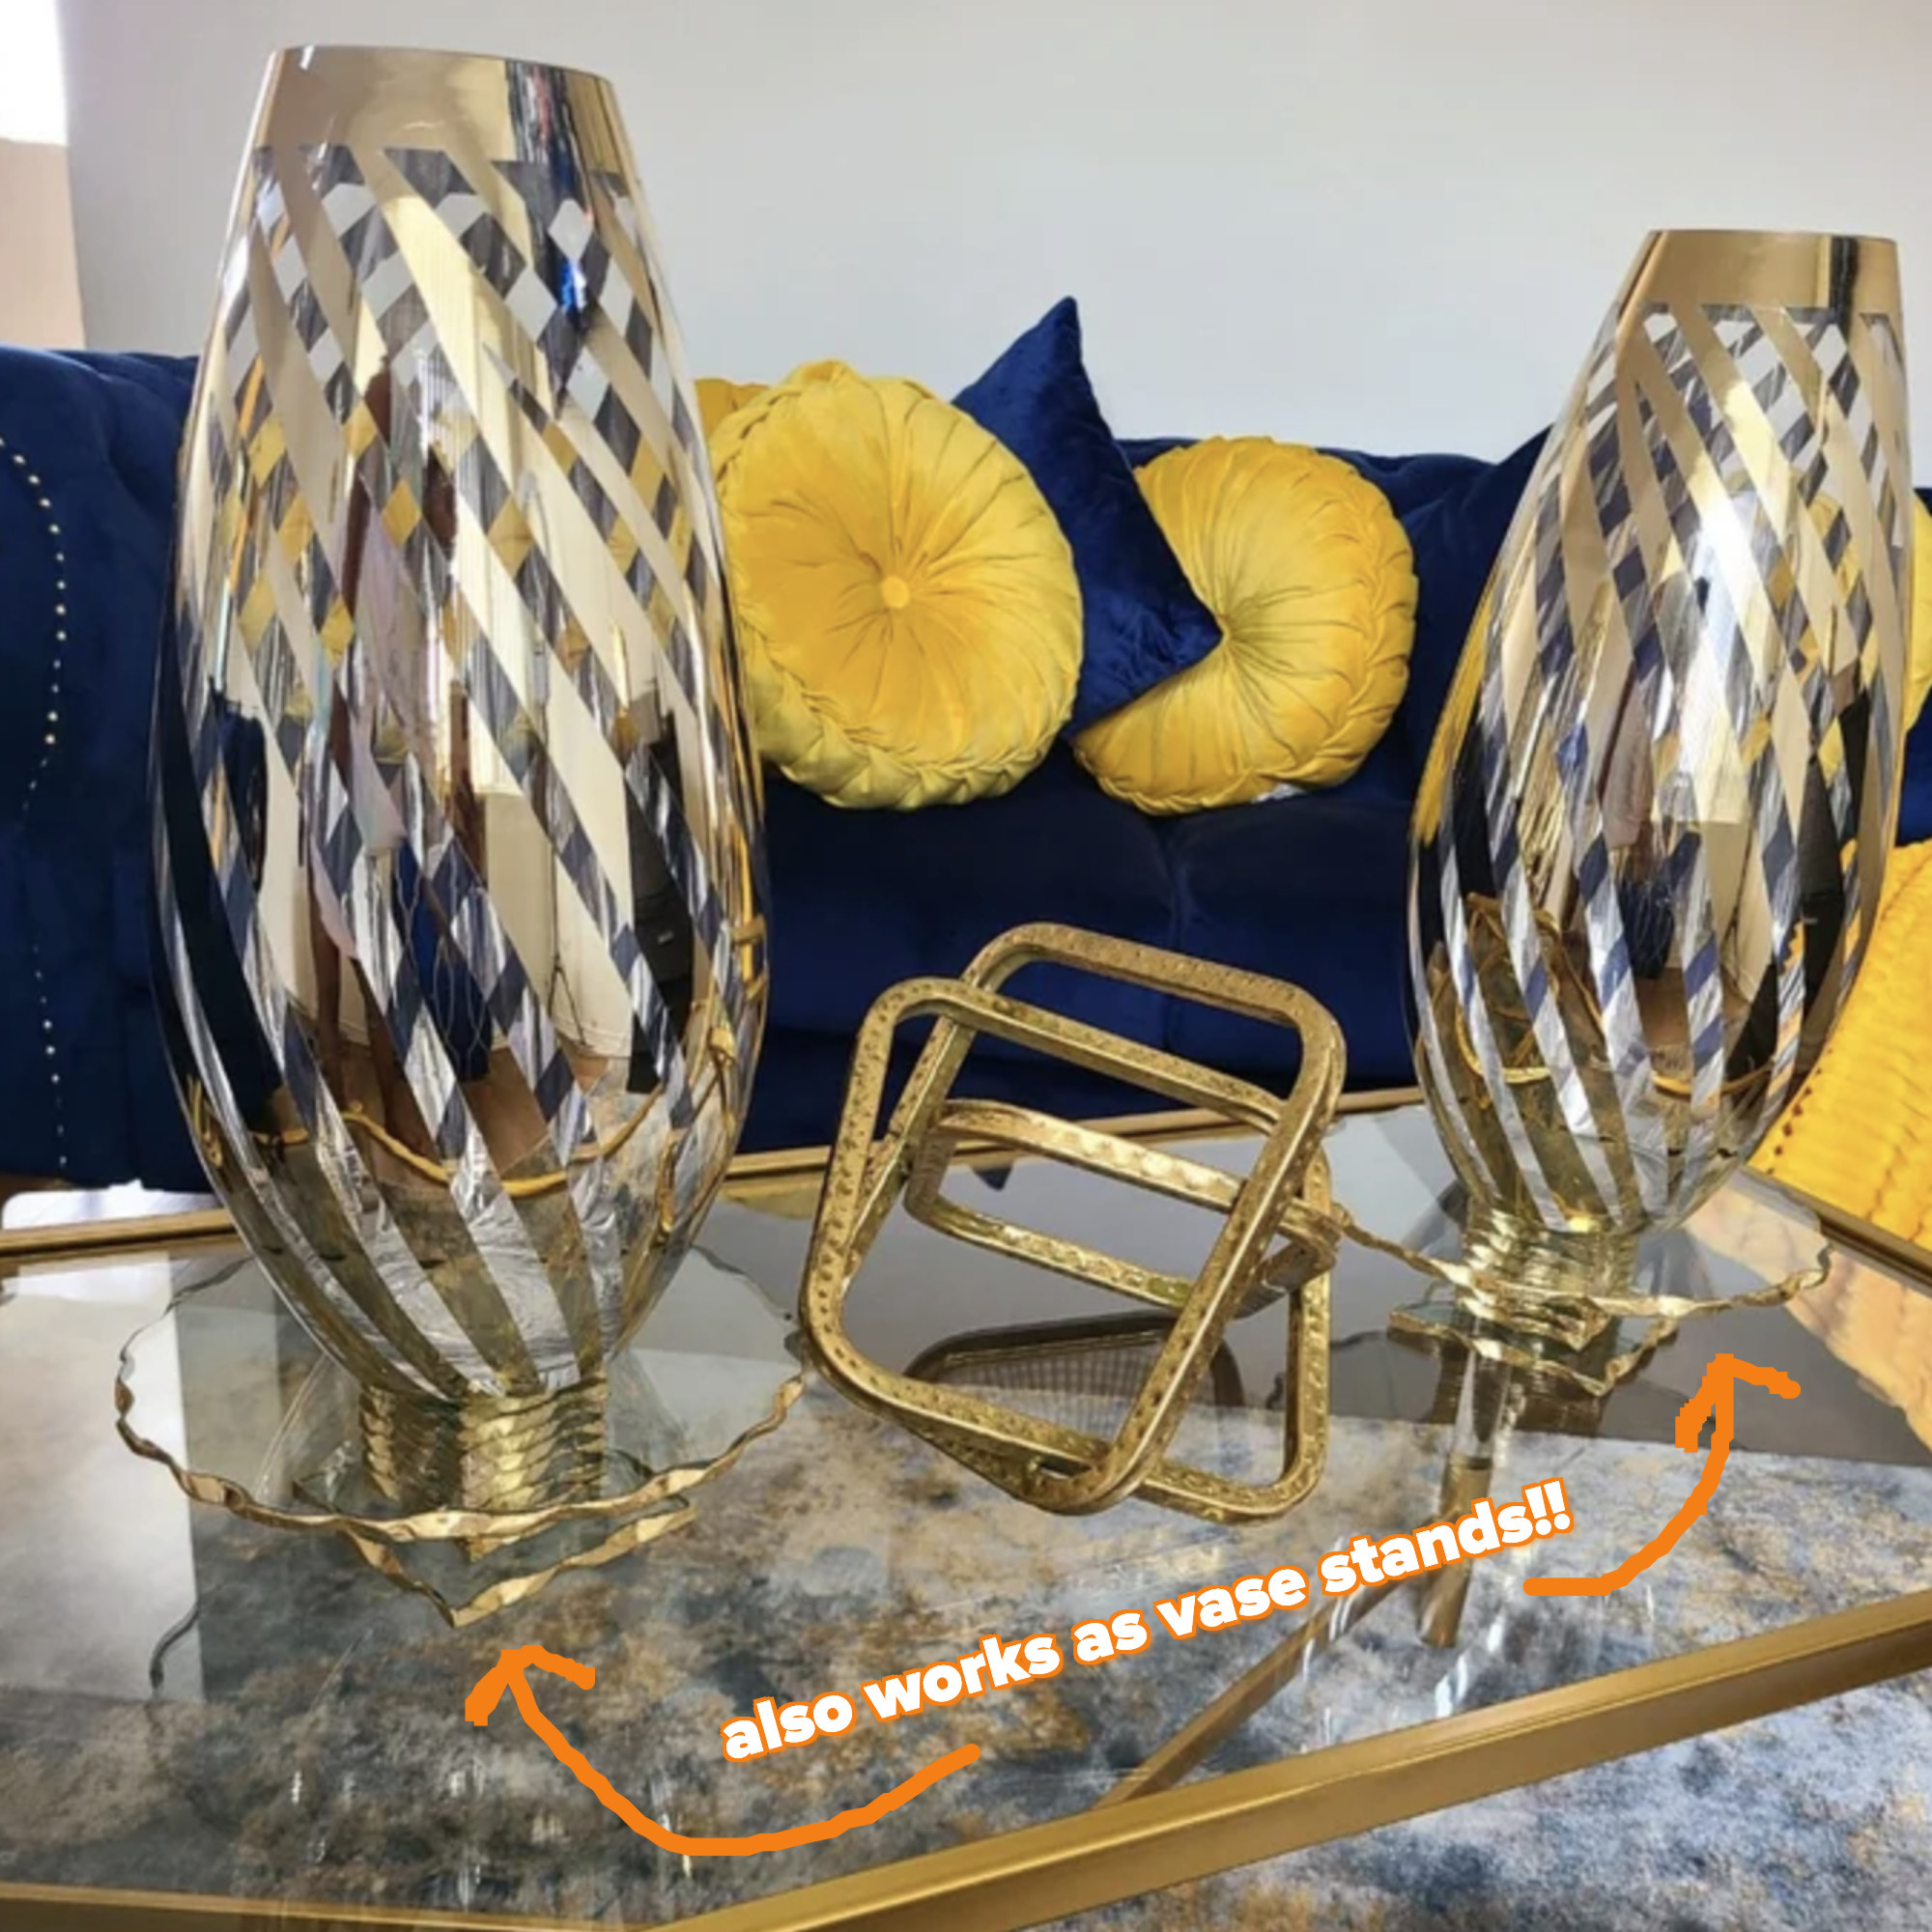 two of the gold and glass cake stands being used to hold up vases